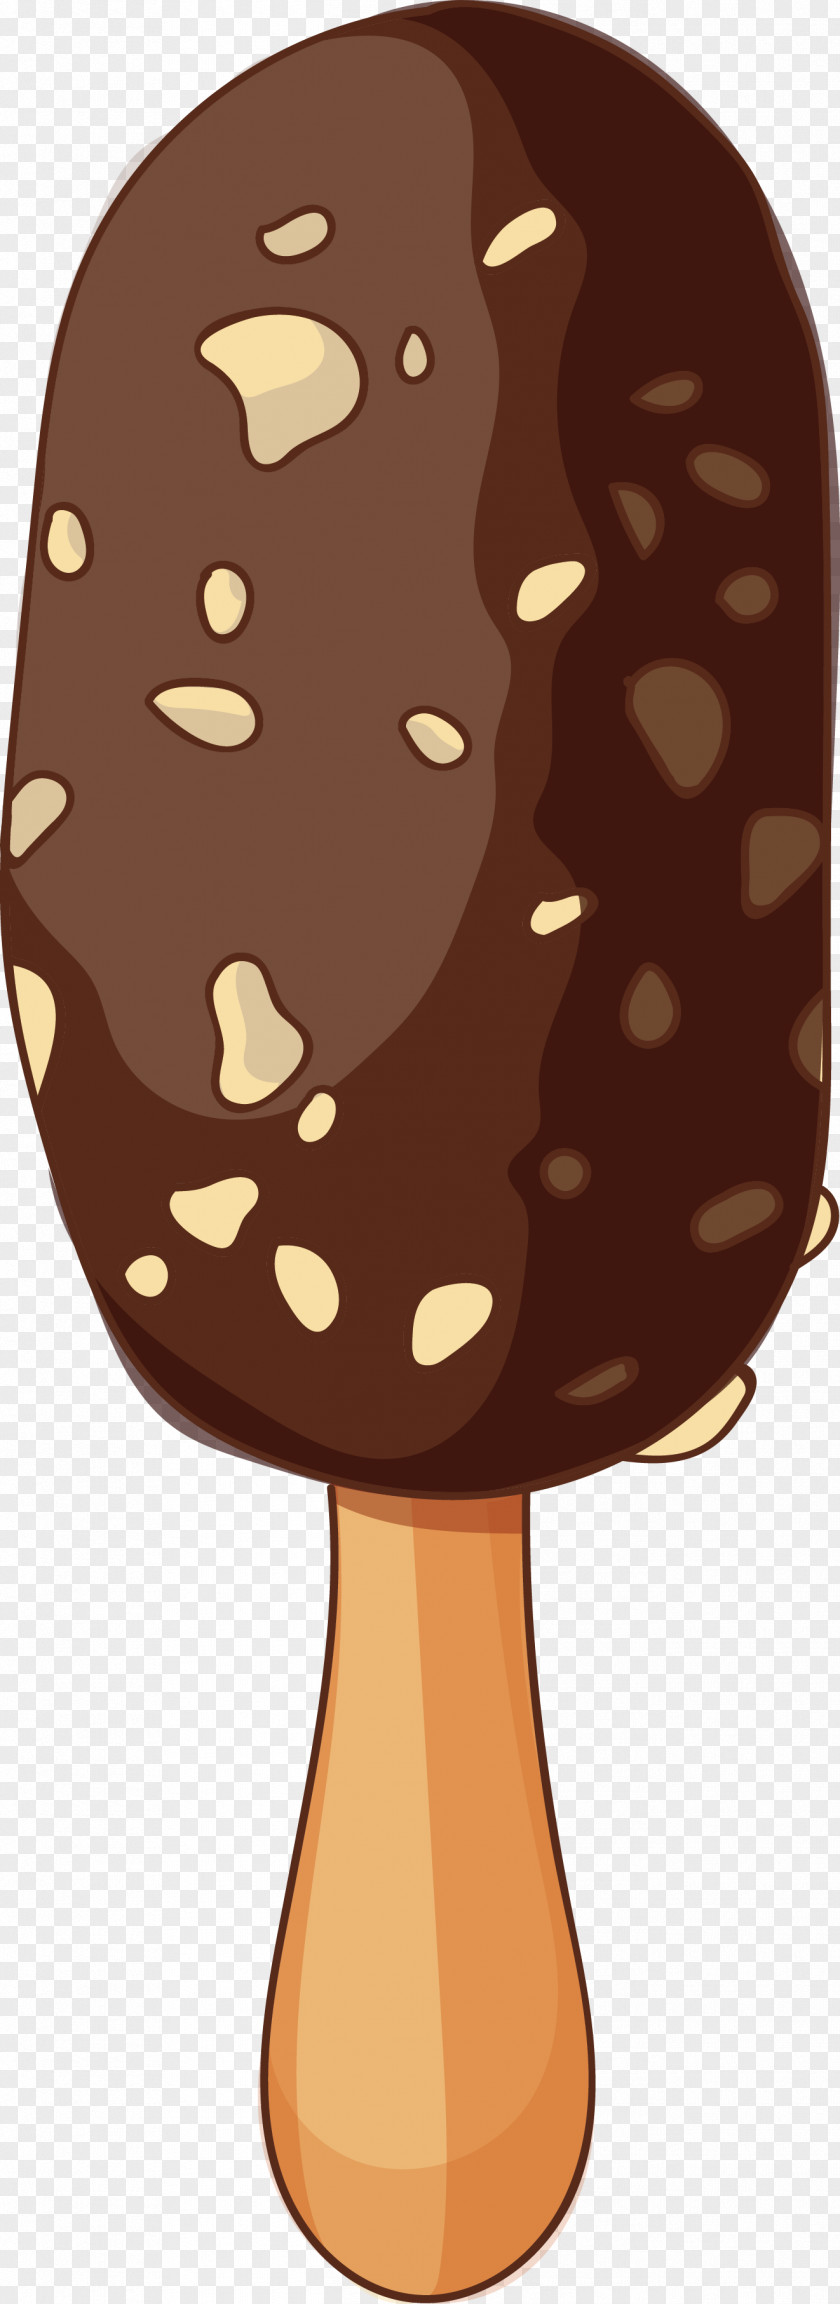 Chocolate Popsicles Vector Ice Cream Pop PNG